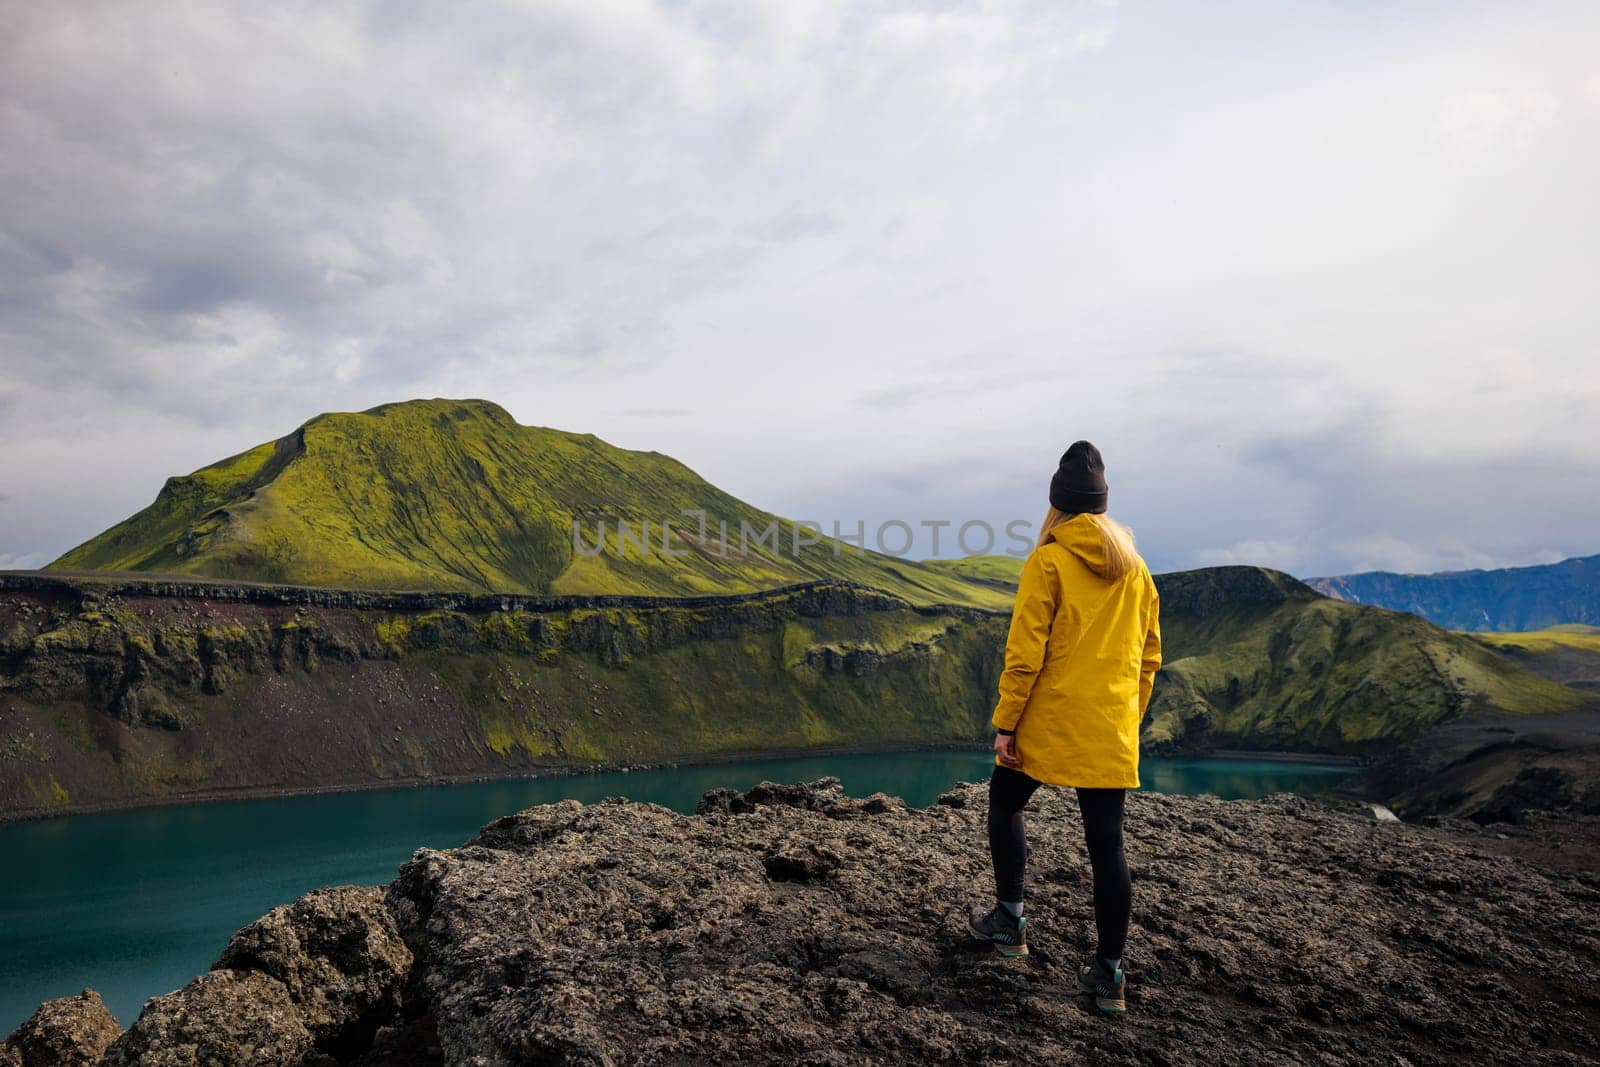 This photo shows a backpacker girl enjoying the beauty of Iceland. She is standing on the shore of Blahylur lake, looking out at the surrounding mossy mountains. The sky is cloudy. Travel and nature photography. It could be used to illustrate a story about the beauty of Iceland, or it could simply be used to create a sense of wonder. Blahylur lake, Iceland highlands.